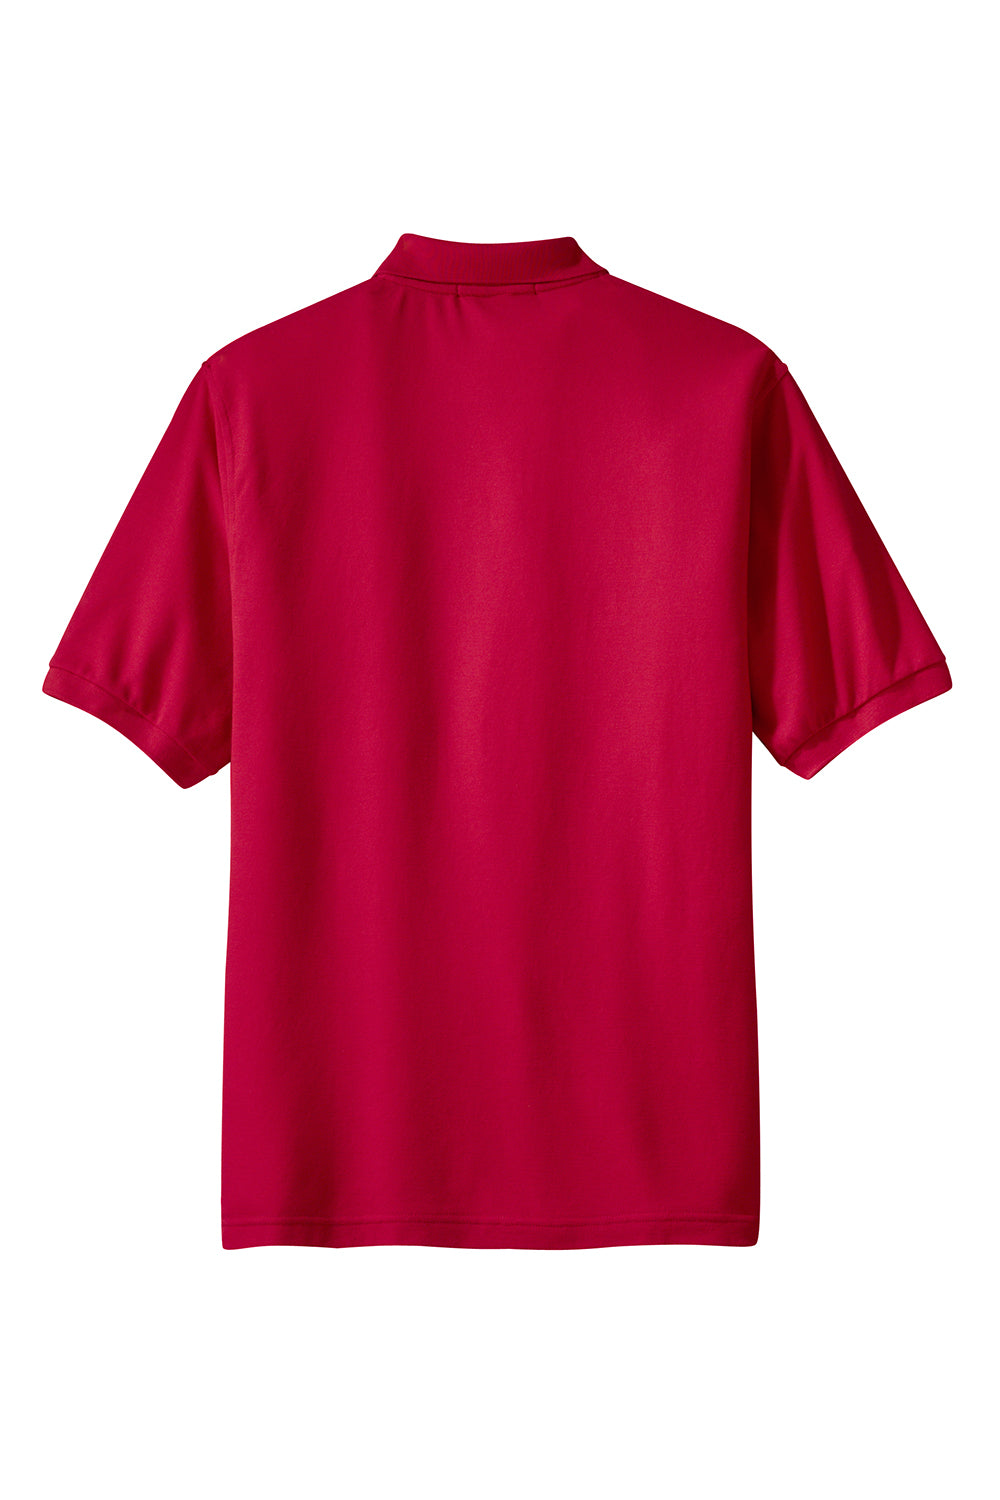 Port Authority K500P Mens Silk Touch Wrinkle Resistant Short Sleeve Polo Shirt w/ Pocket Red Flat Back